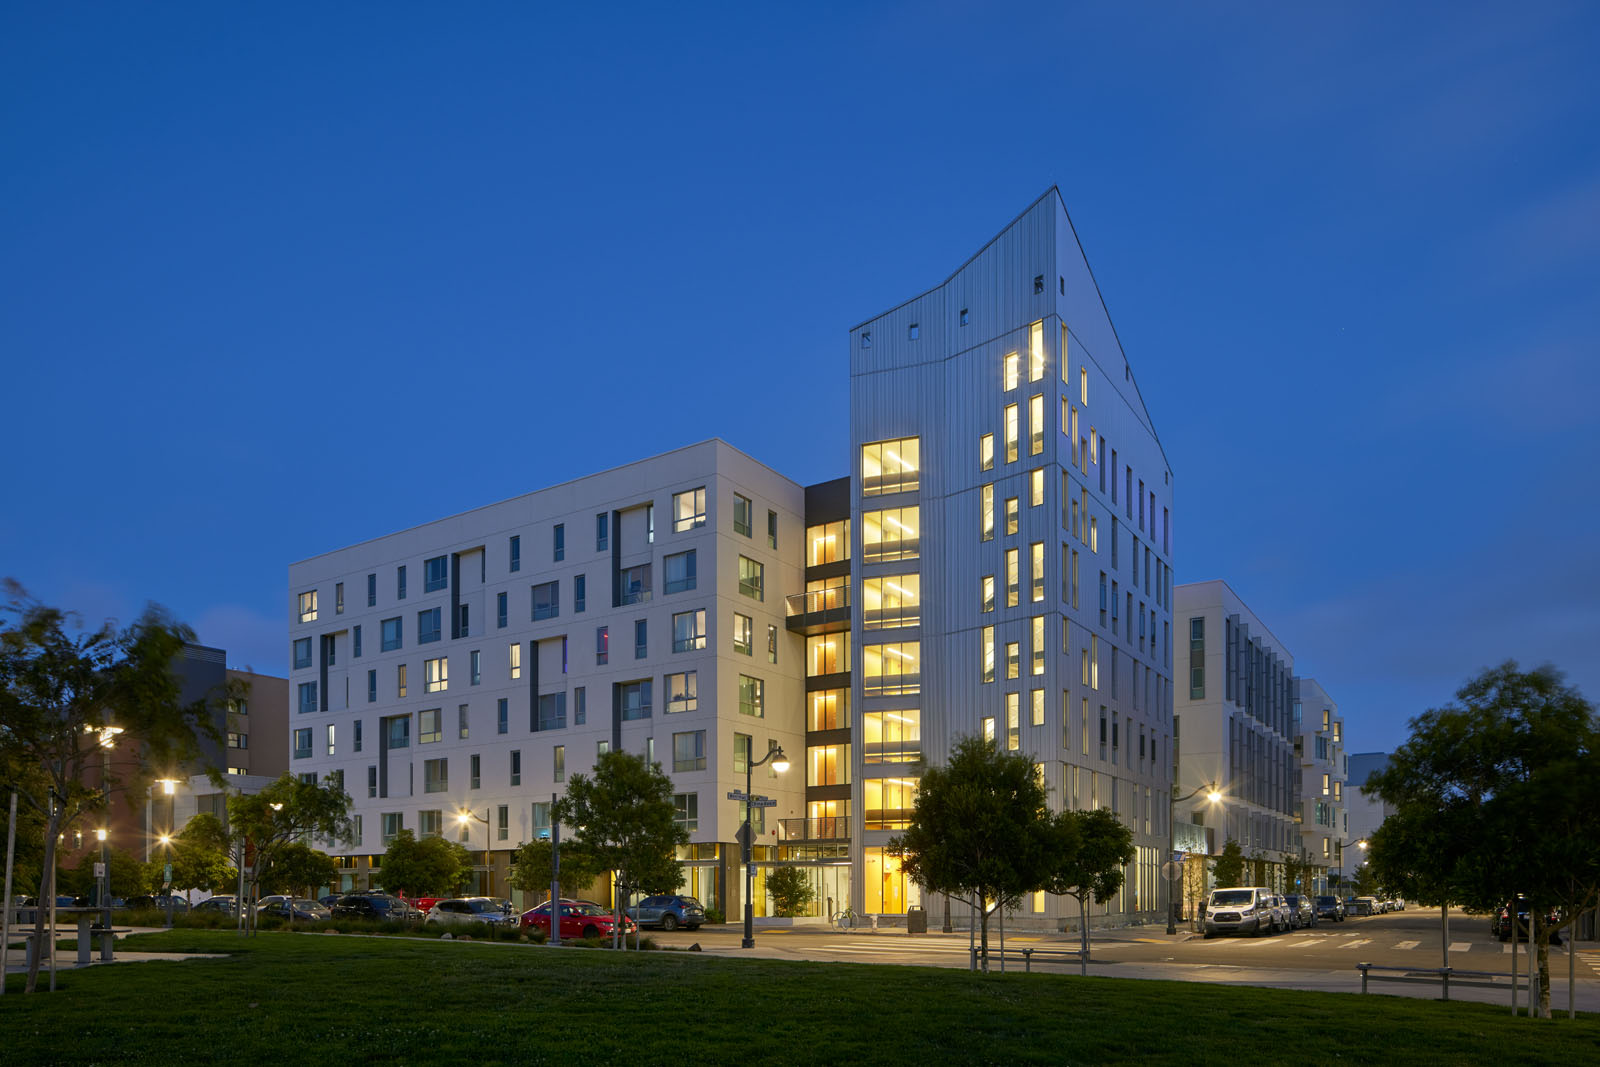 This mid-rise affordable housing project has plenty of room to gather with multiple indoor and outdoor community spaces. Sister Lillian Murphy Community, Mission Bay. San Francisco, California © Bruce Damonte